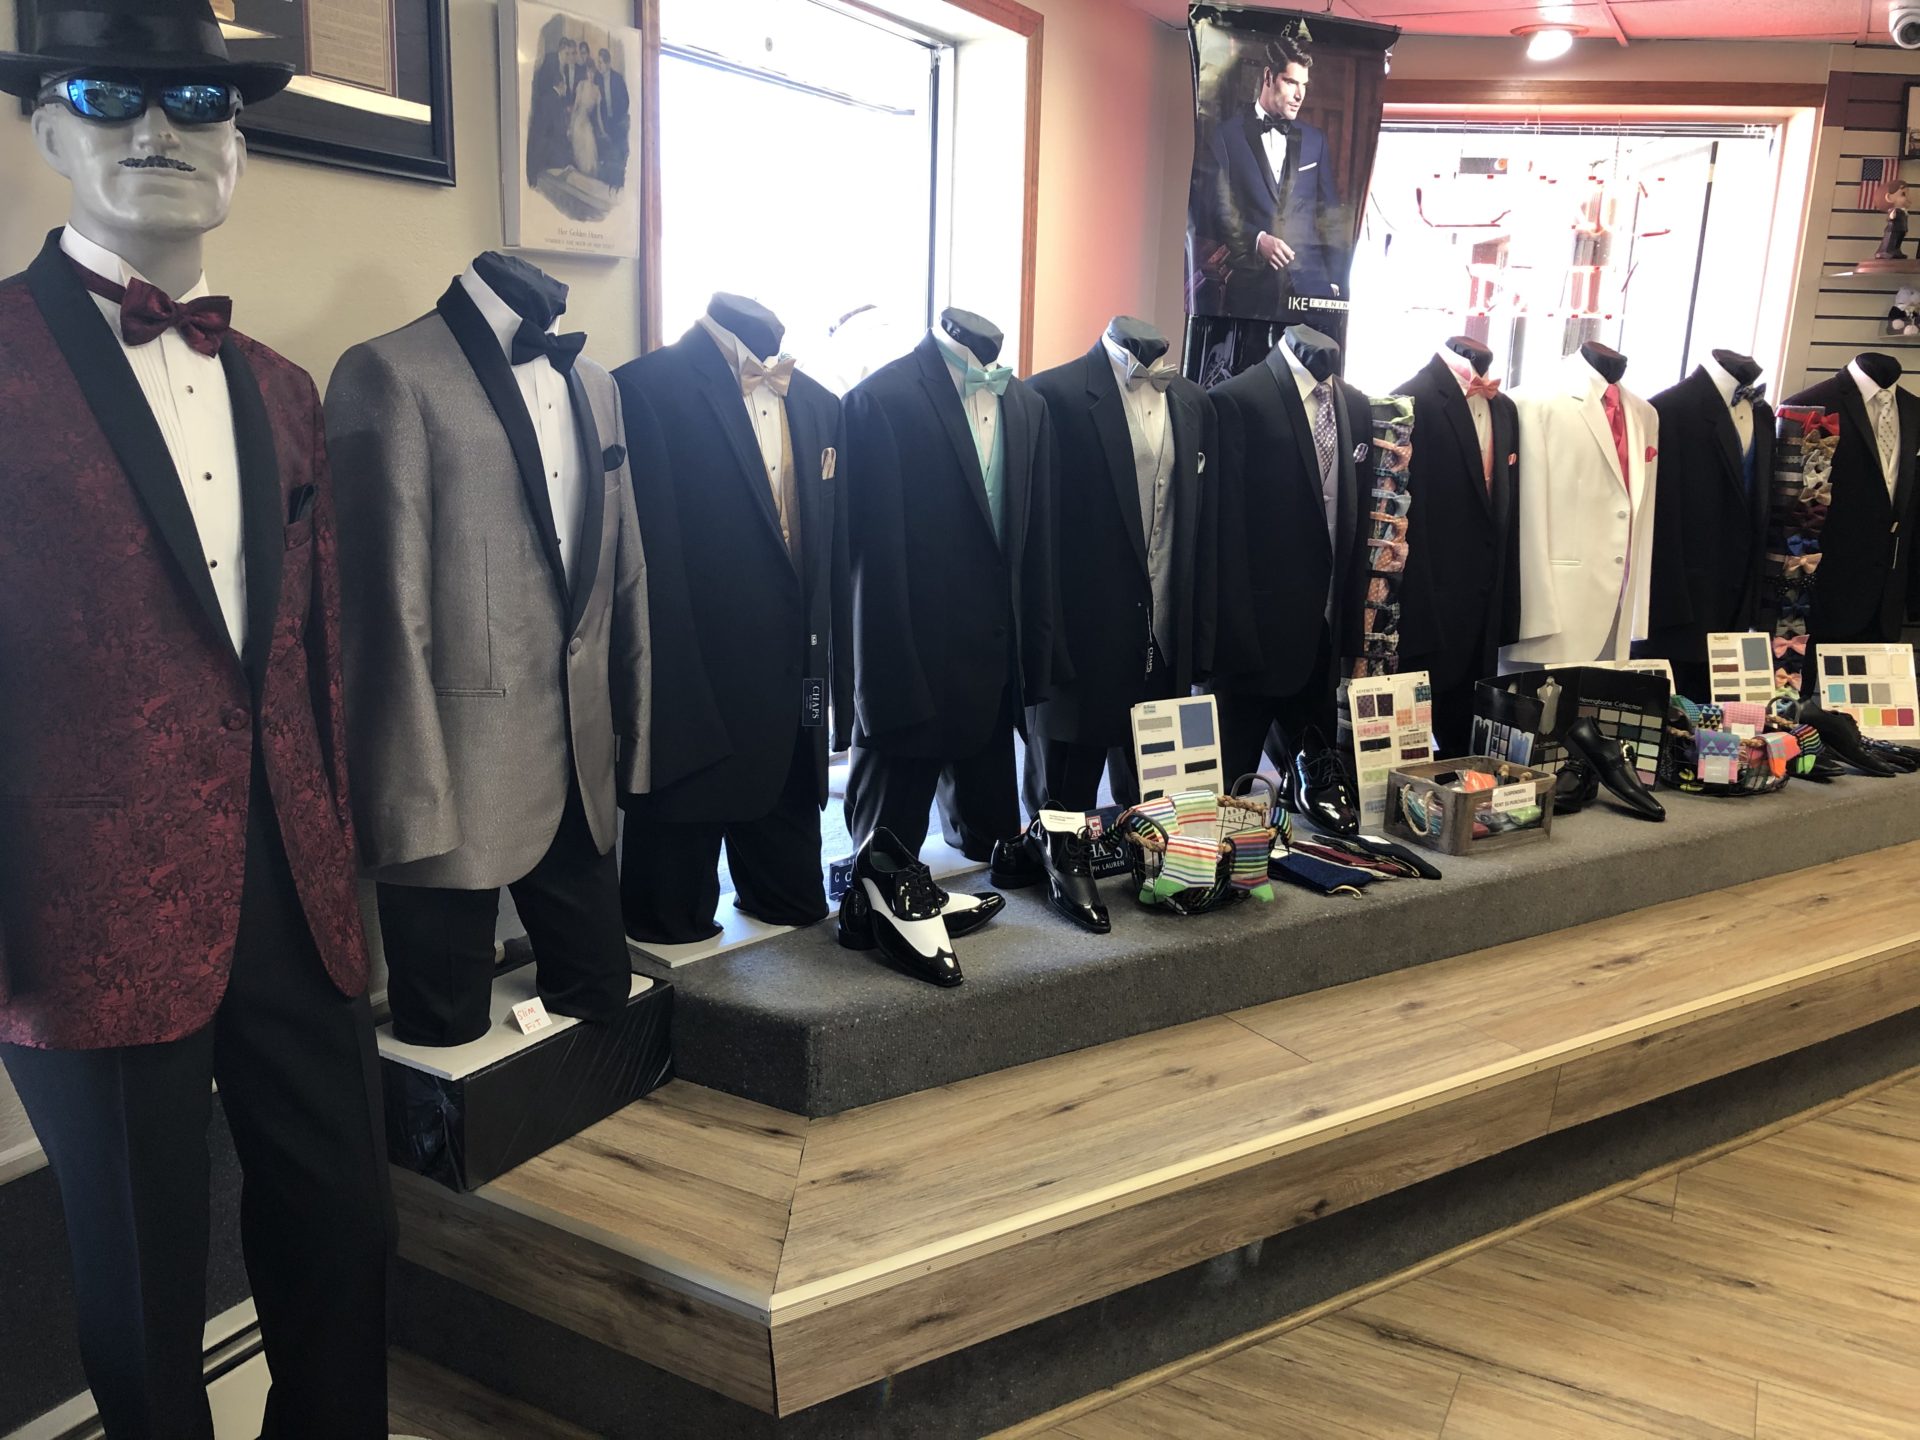 A room filled with suits and ties on display.